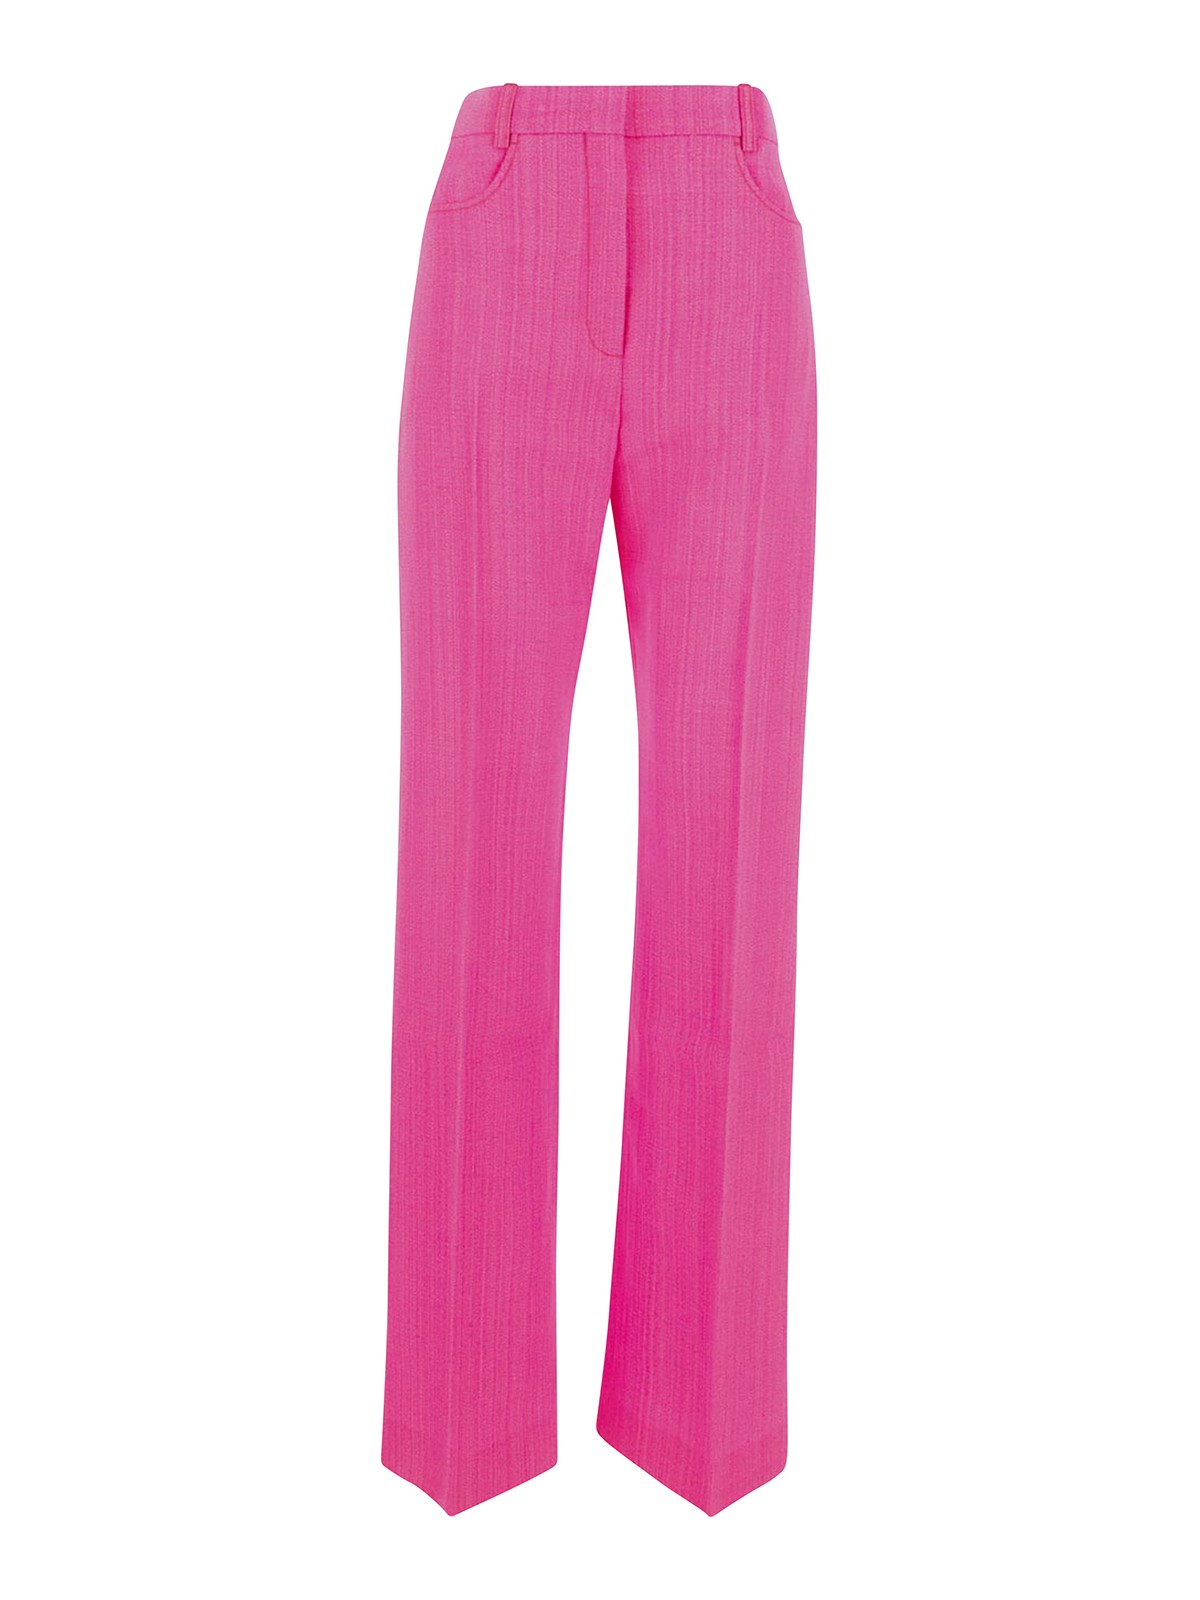 JACQUEMUS PINK TROUSERS